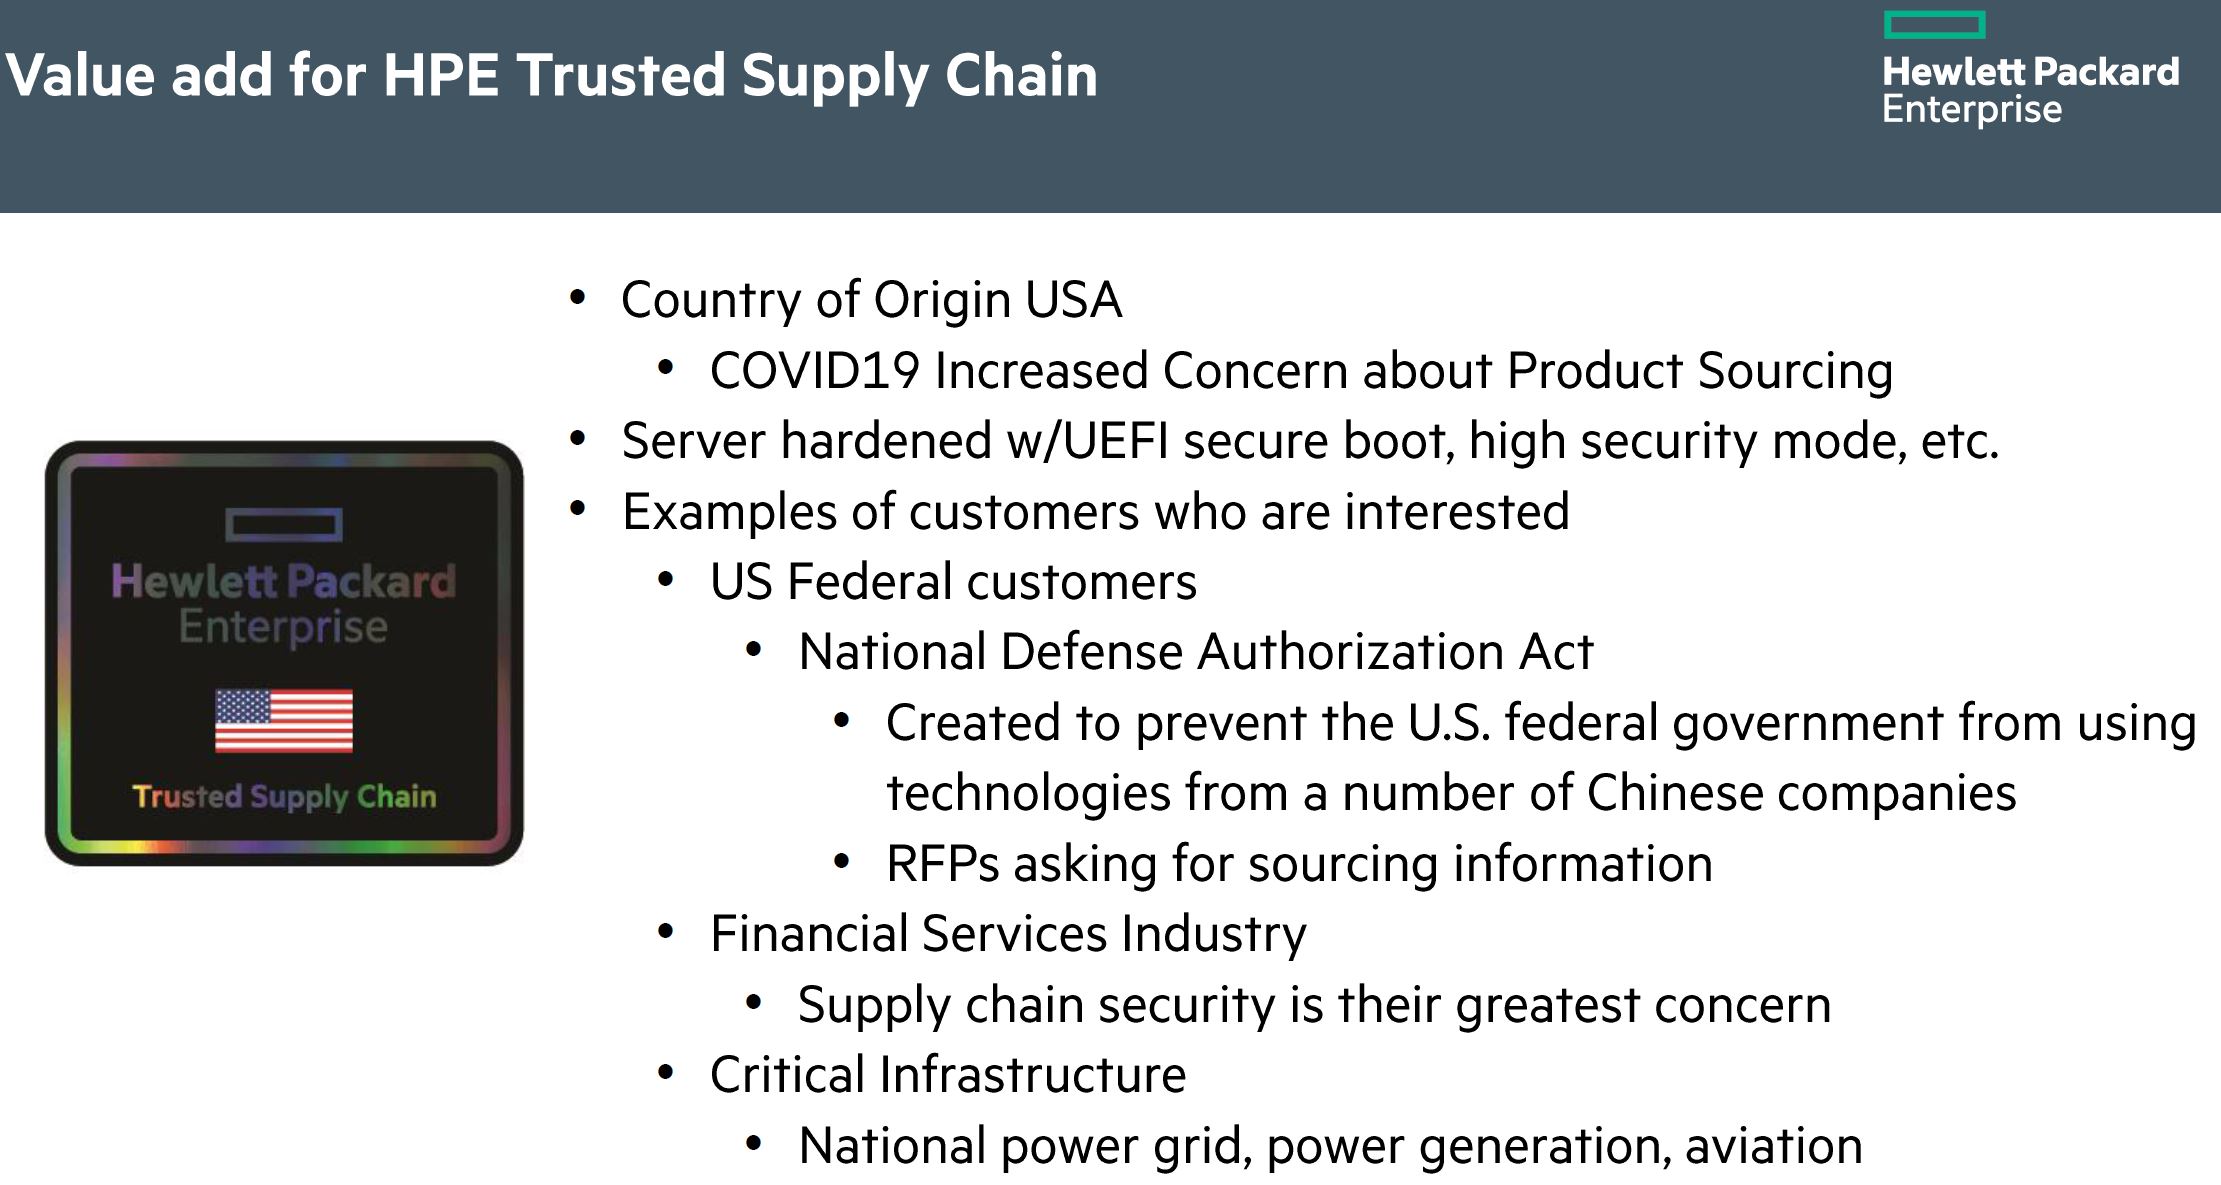 HPE Trusted Supply Chain Reasons